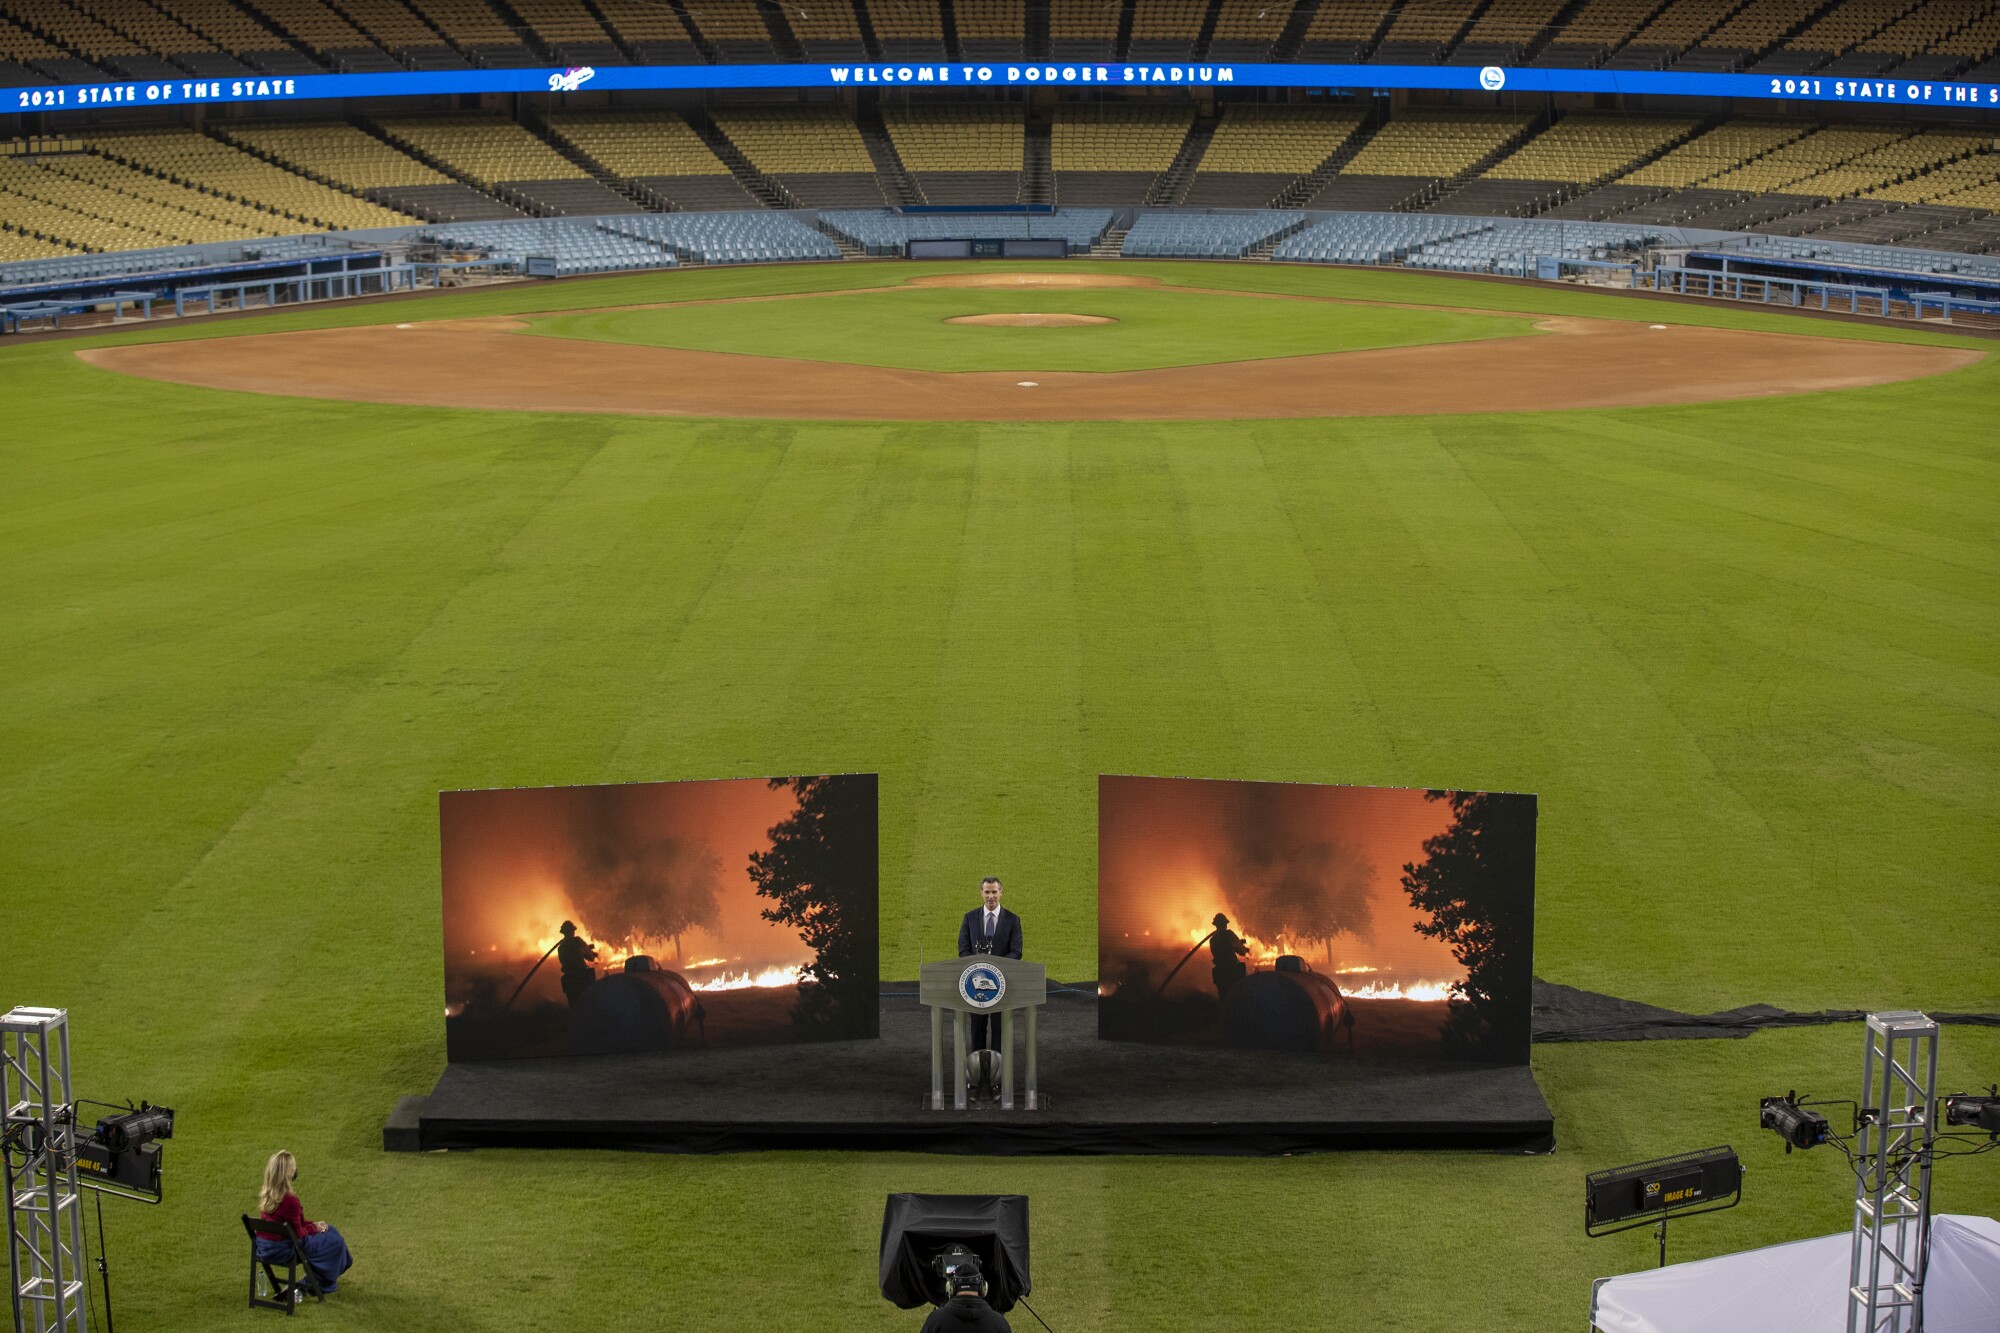 Two people and two large video screens are seen on a baseball field.